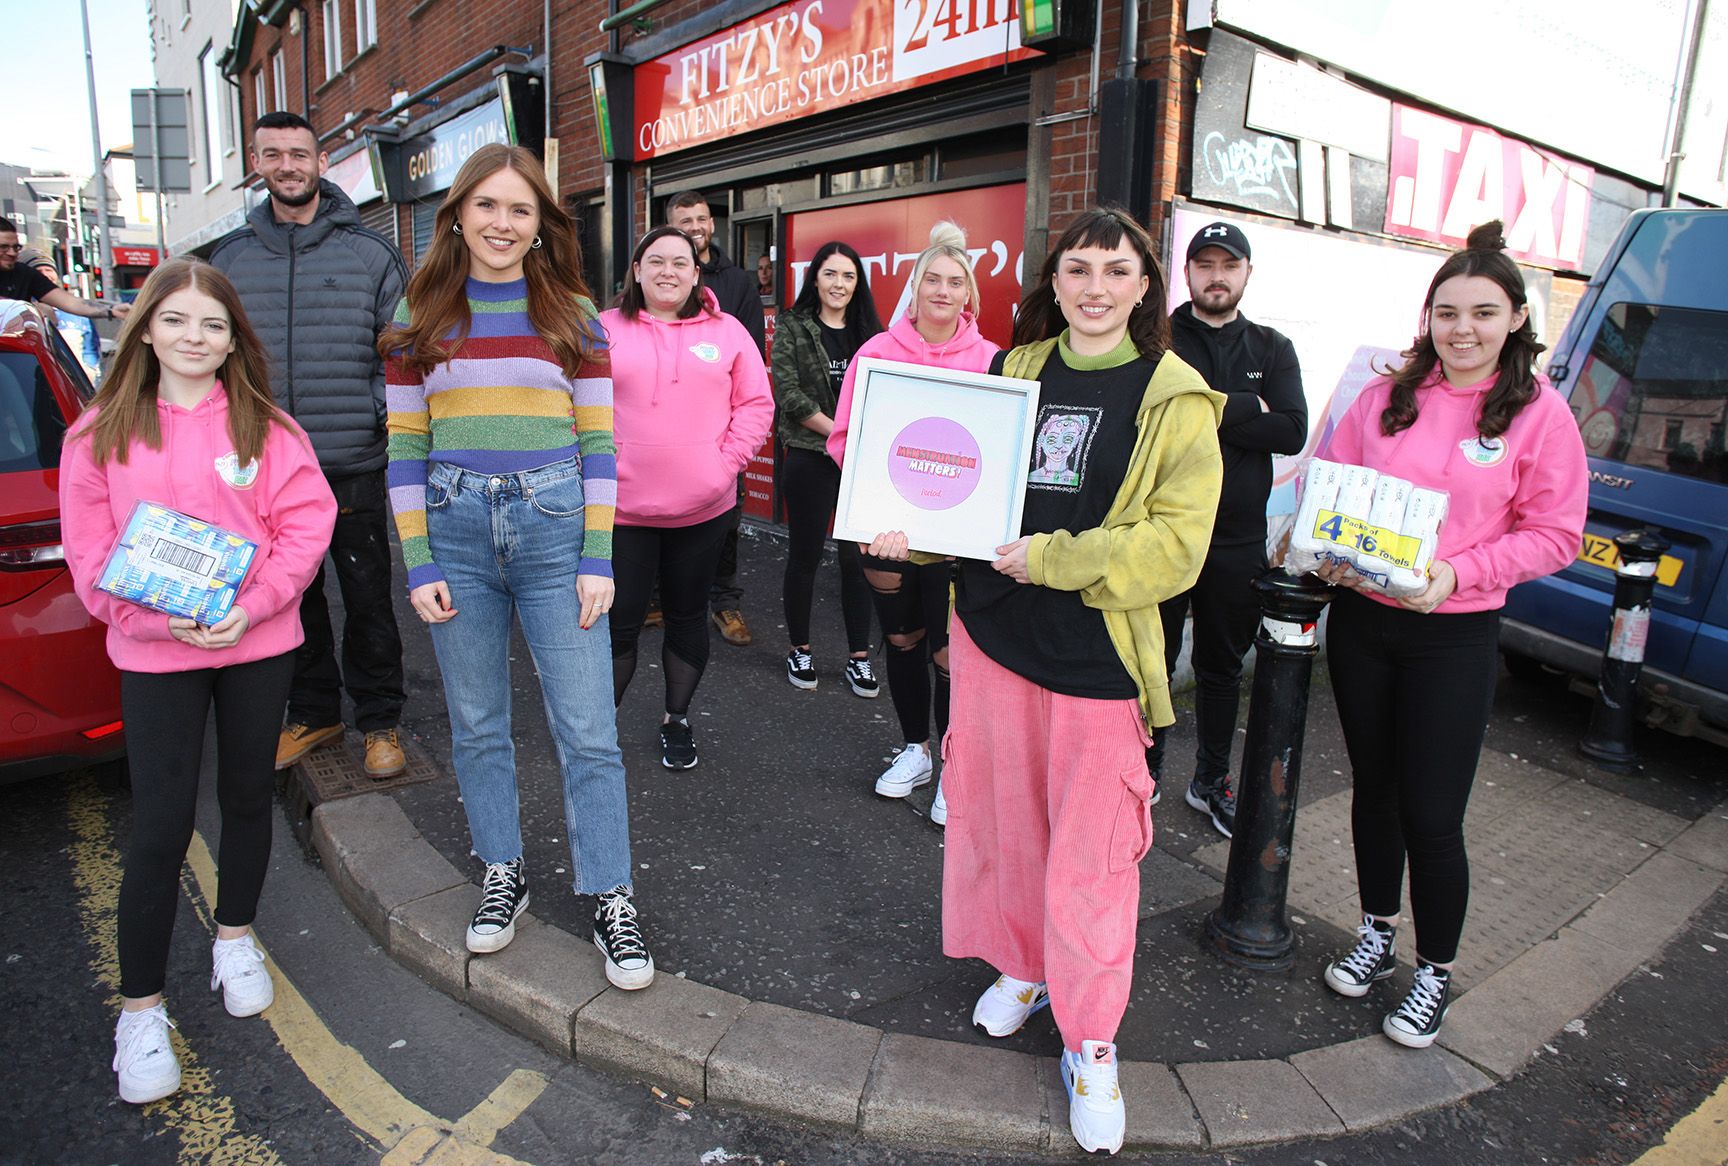 TAKING A STAND: Fitzy’s fighting period poverty with artist Nuala Convery and members from the charity Homeless Period Belfast